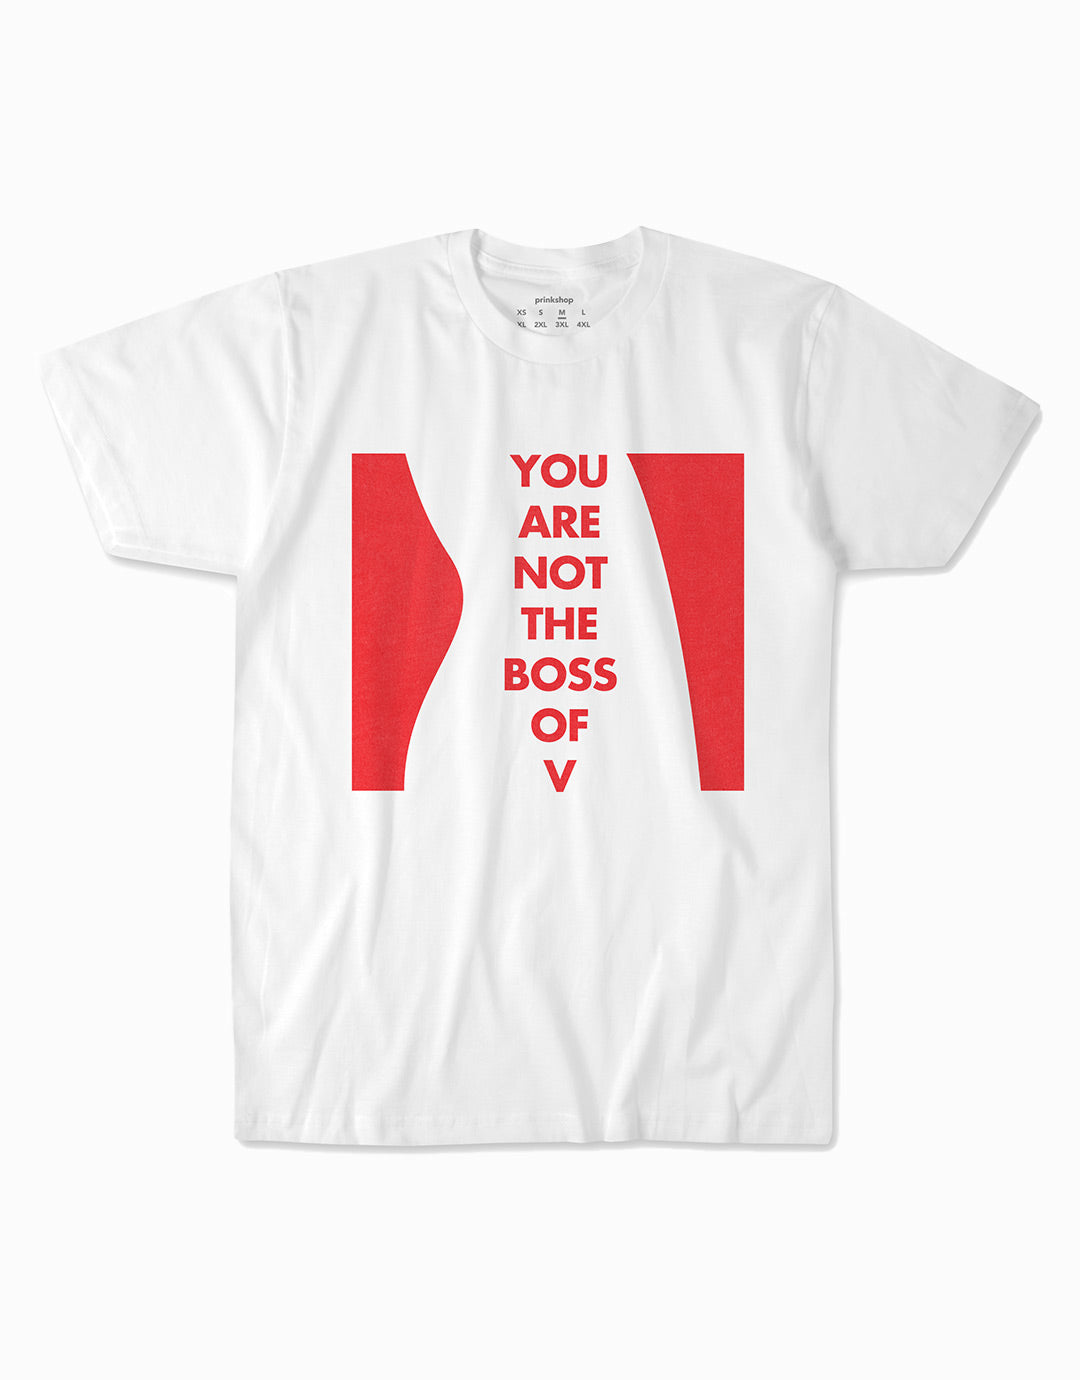 You are Not the Boss of V T-Shirt - Red